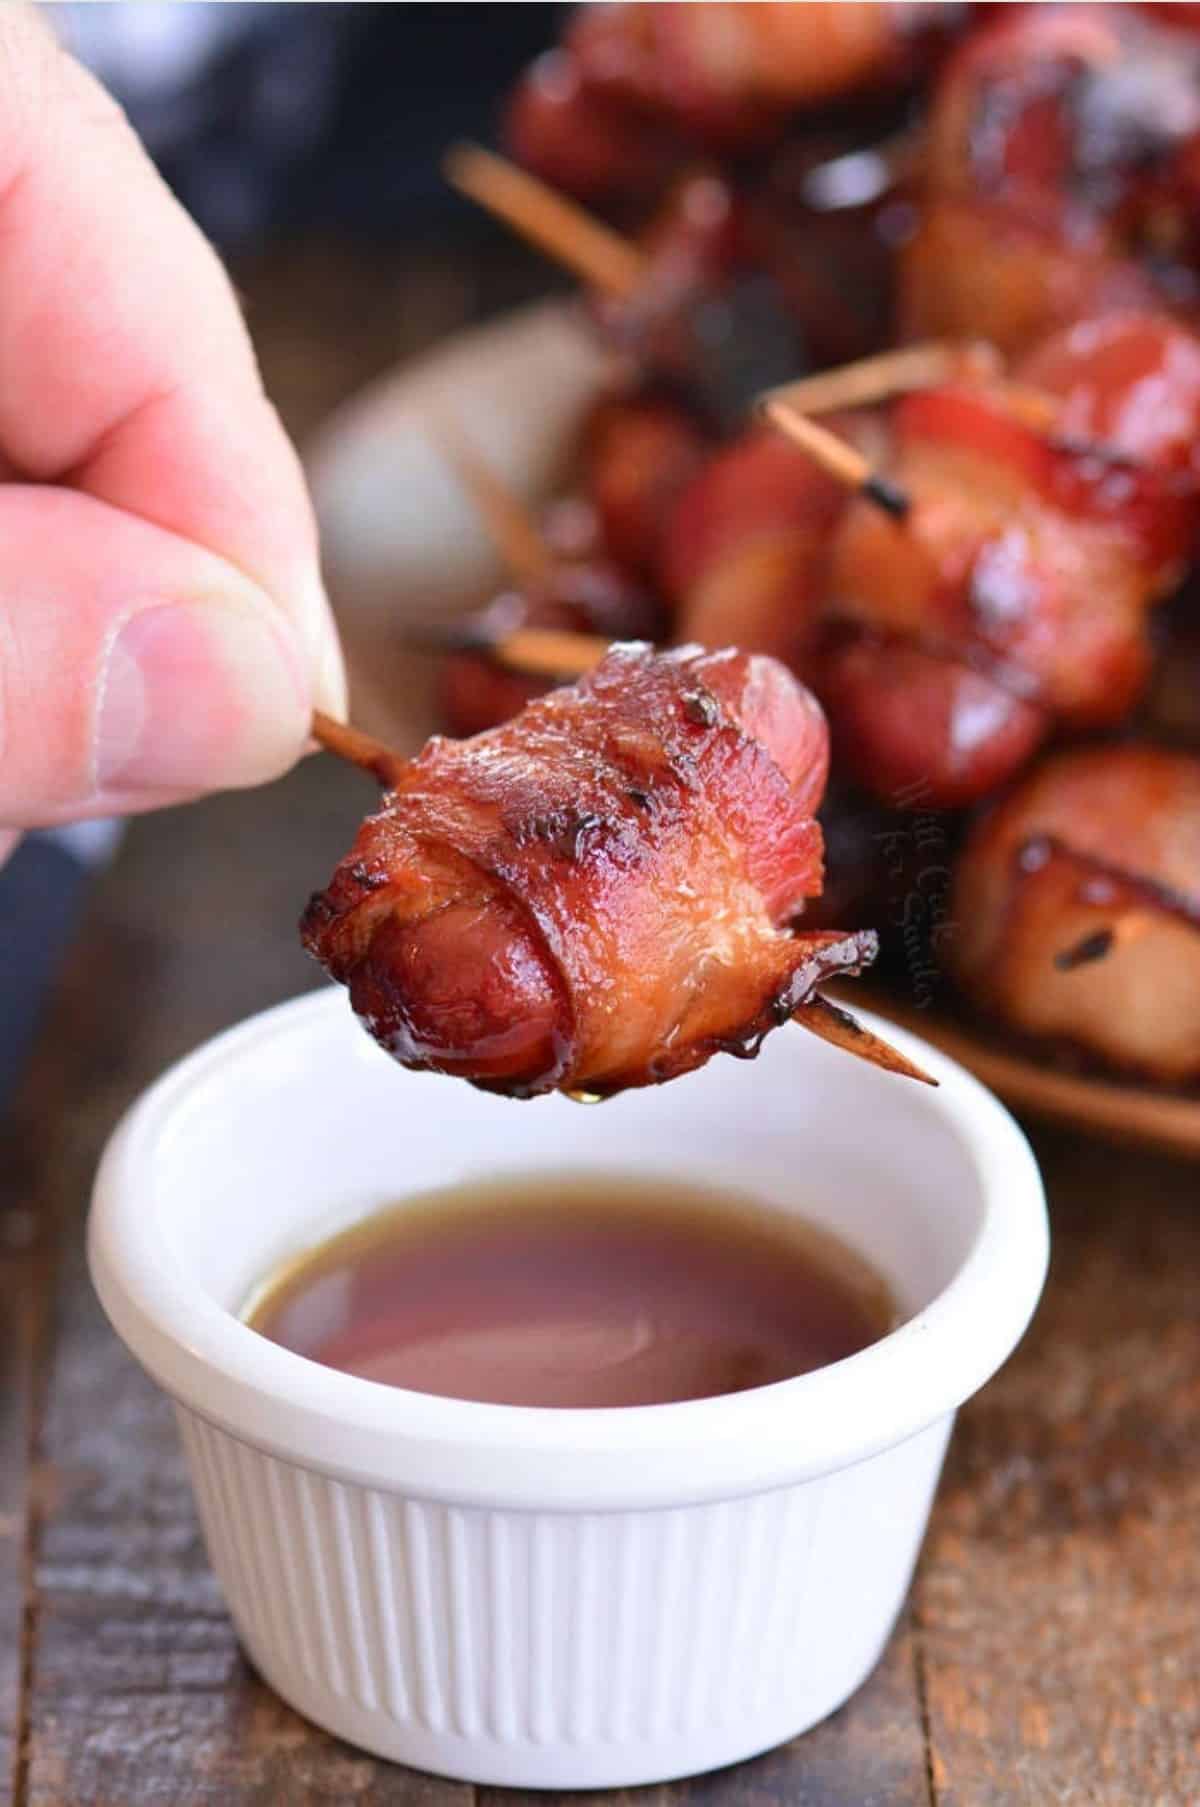 dipping a bacon wrapped little smokies into some maple syrup.